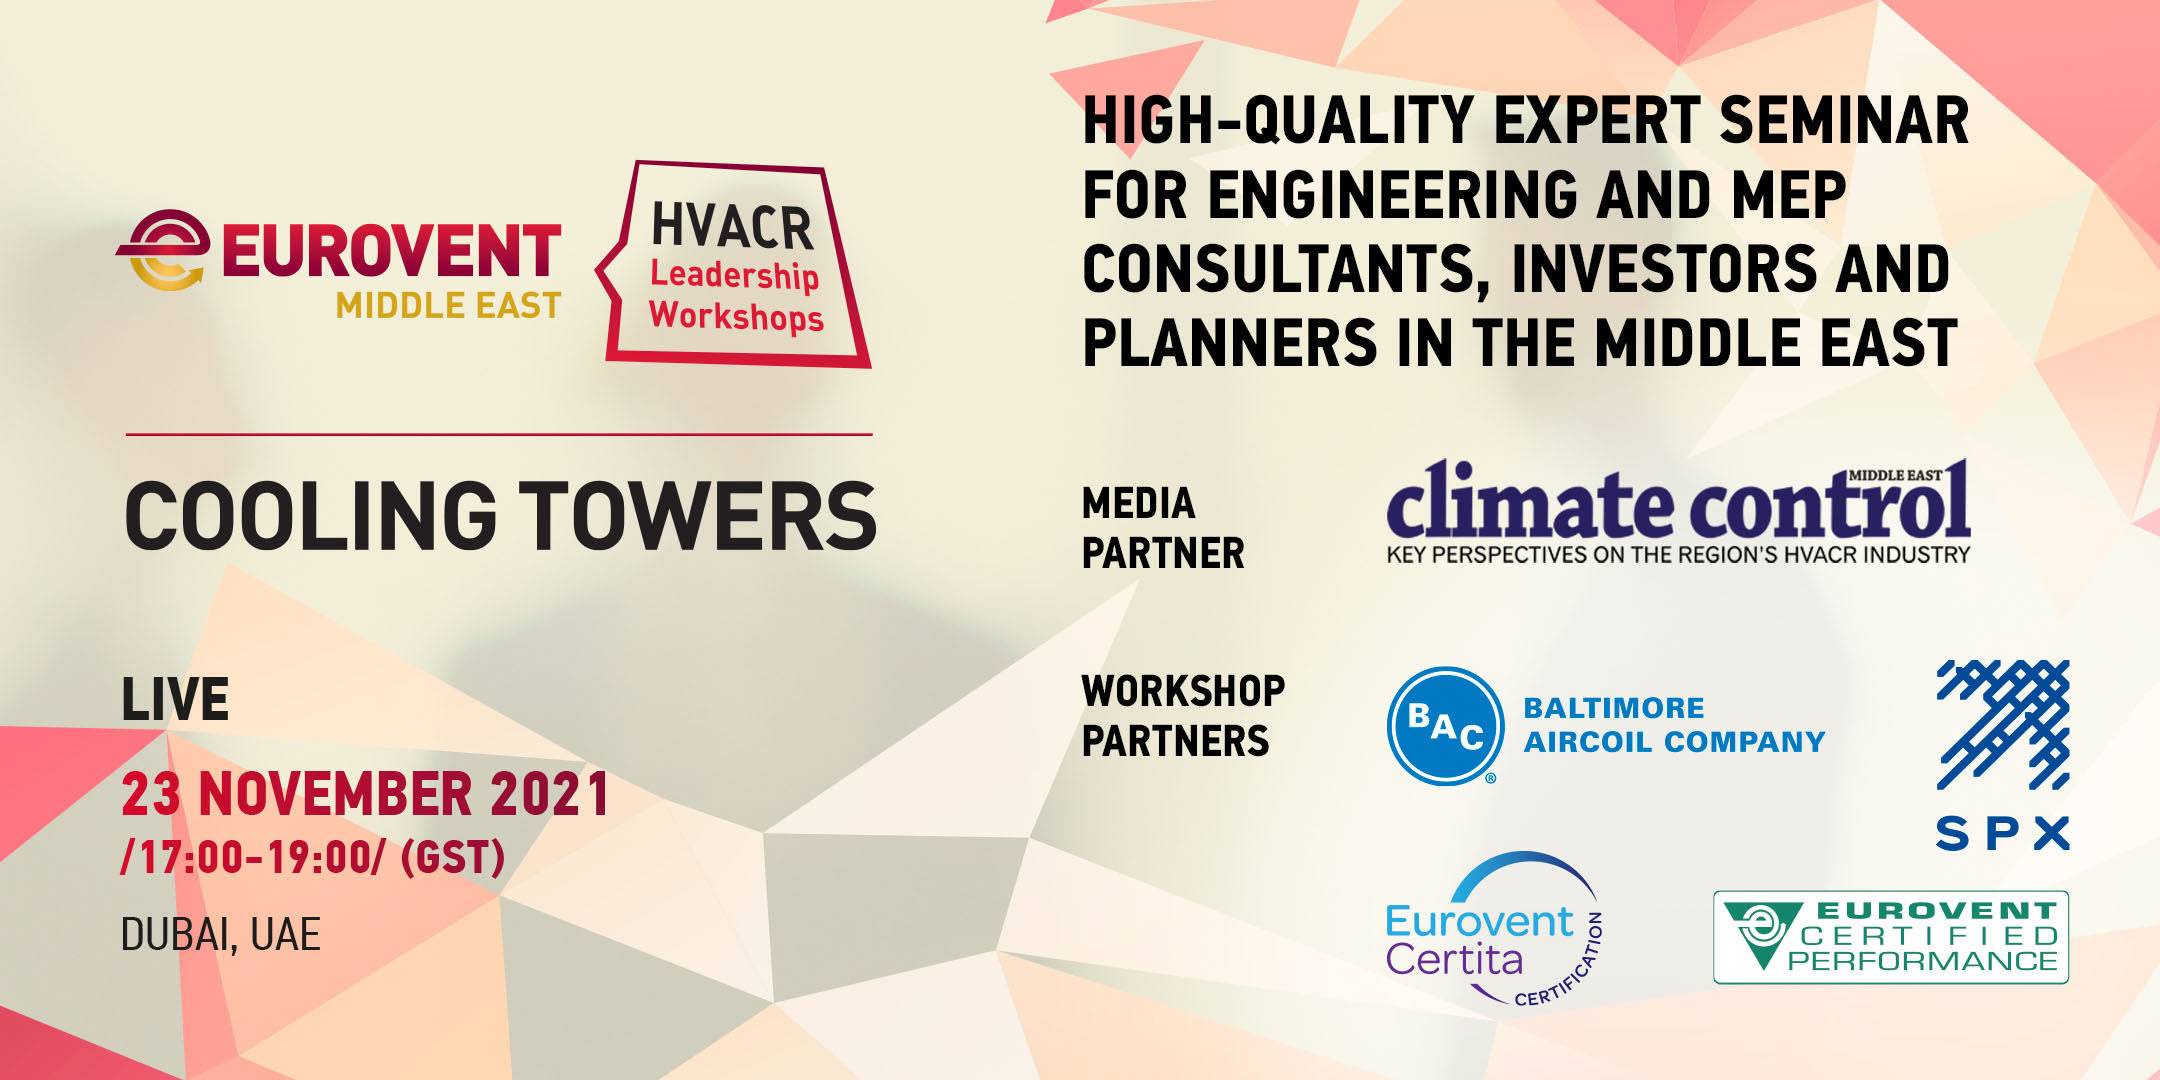 2021 - HVACR Leadership Workshops by Eurovent Middle East - Cooling Towers